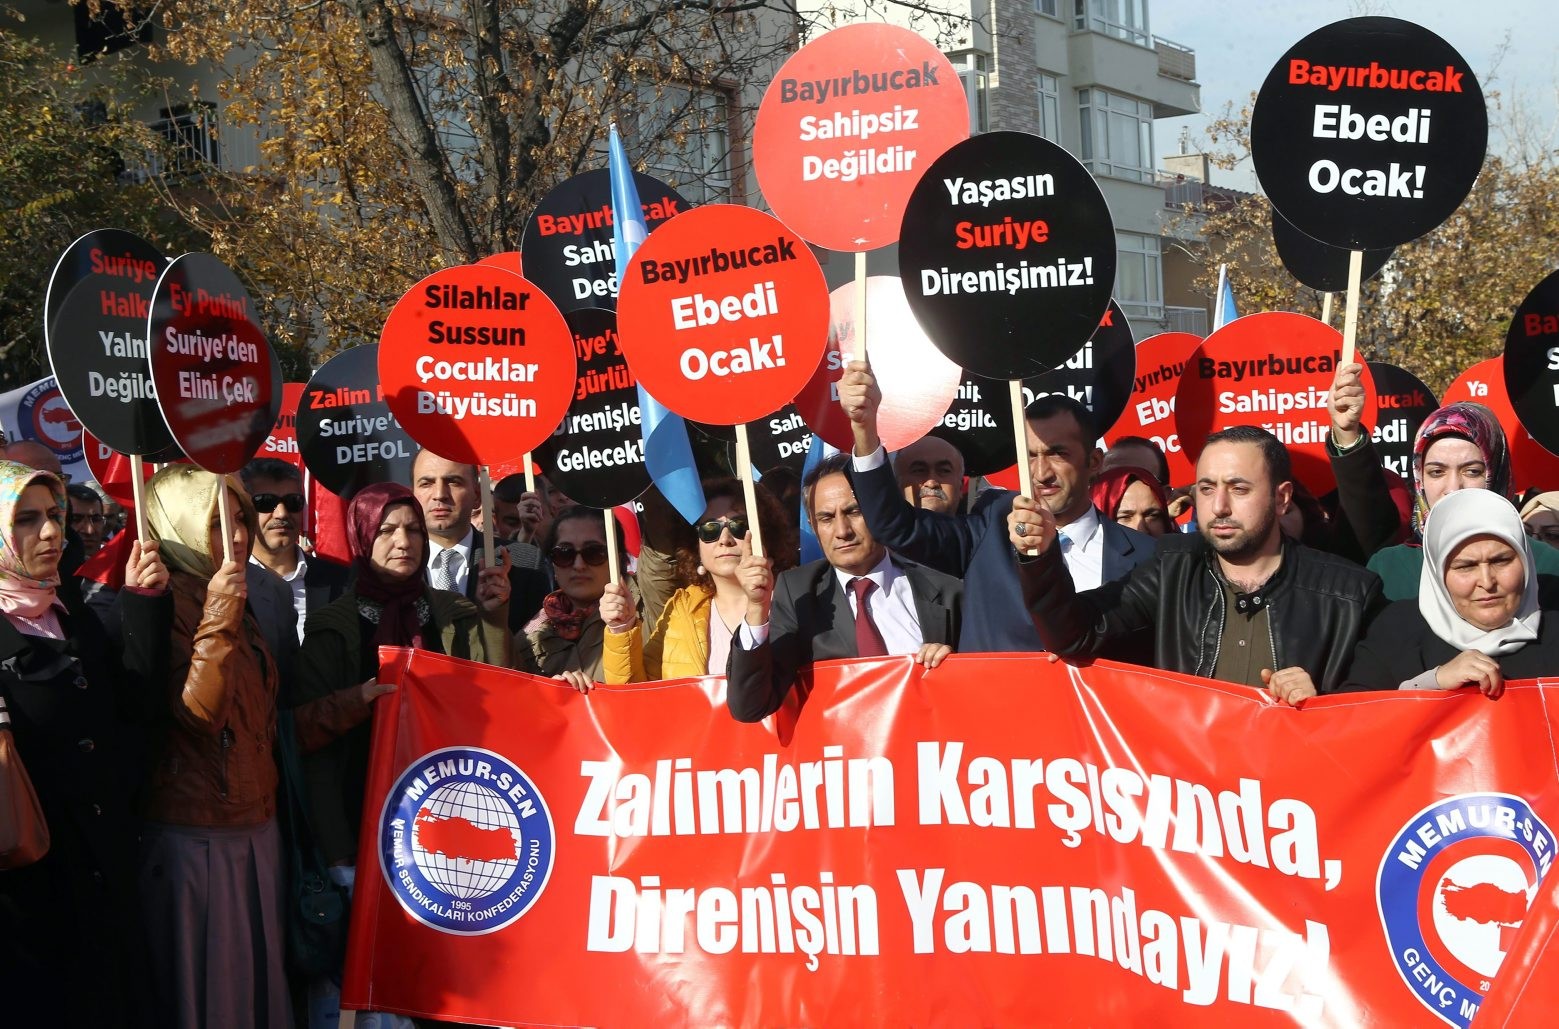 Turkish demonstrators hold a banner and placards that read " we are with resistance against aggressors" as they protest Russian support to Assad regime in Syria, outside the Russian embassy in Ankara, Turkey, Tuesday, Nov. 24, 2015. Turkey shot down a Russian warplane Tuesday, claiming it had violated Turkish airspace and ignored repeated warnings. Russia denied that the plane crossed the Syrian border into Turkish skies. Russia said the Su-24 was downed by artillery fire, but Turkey claimed that its F-16s fired on the Russian plane after it ignored several warnings.(AP Photo) Turkey Syria Plane